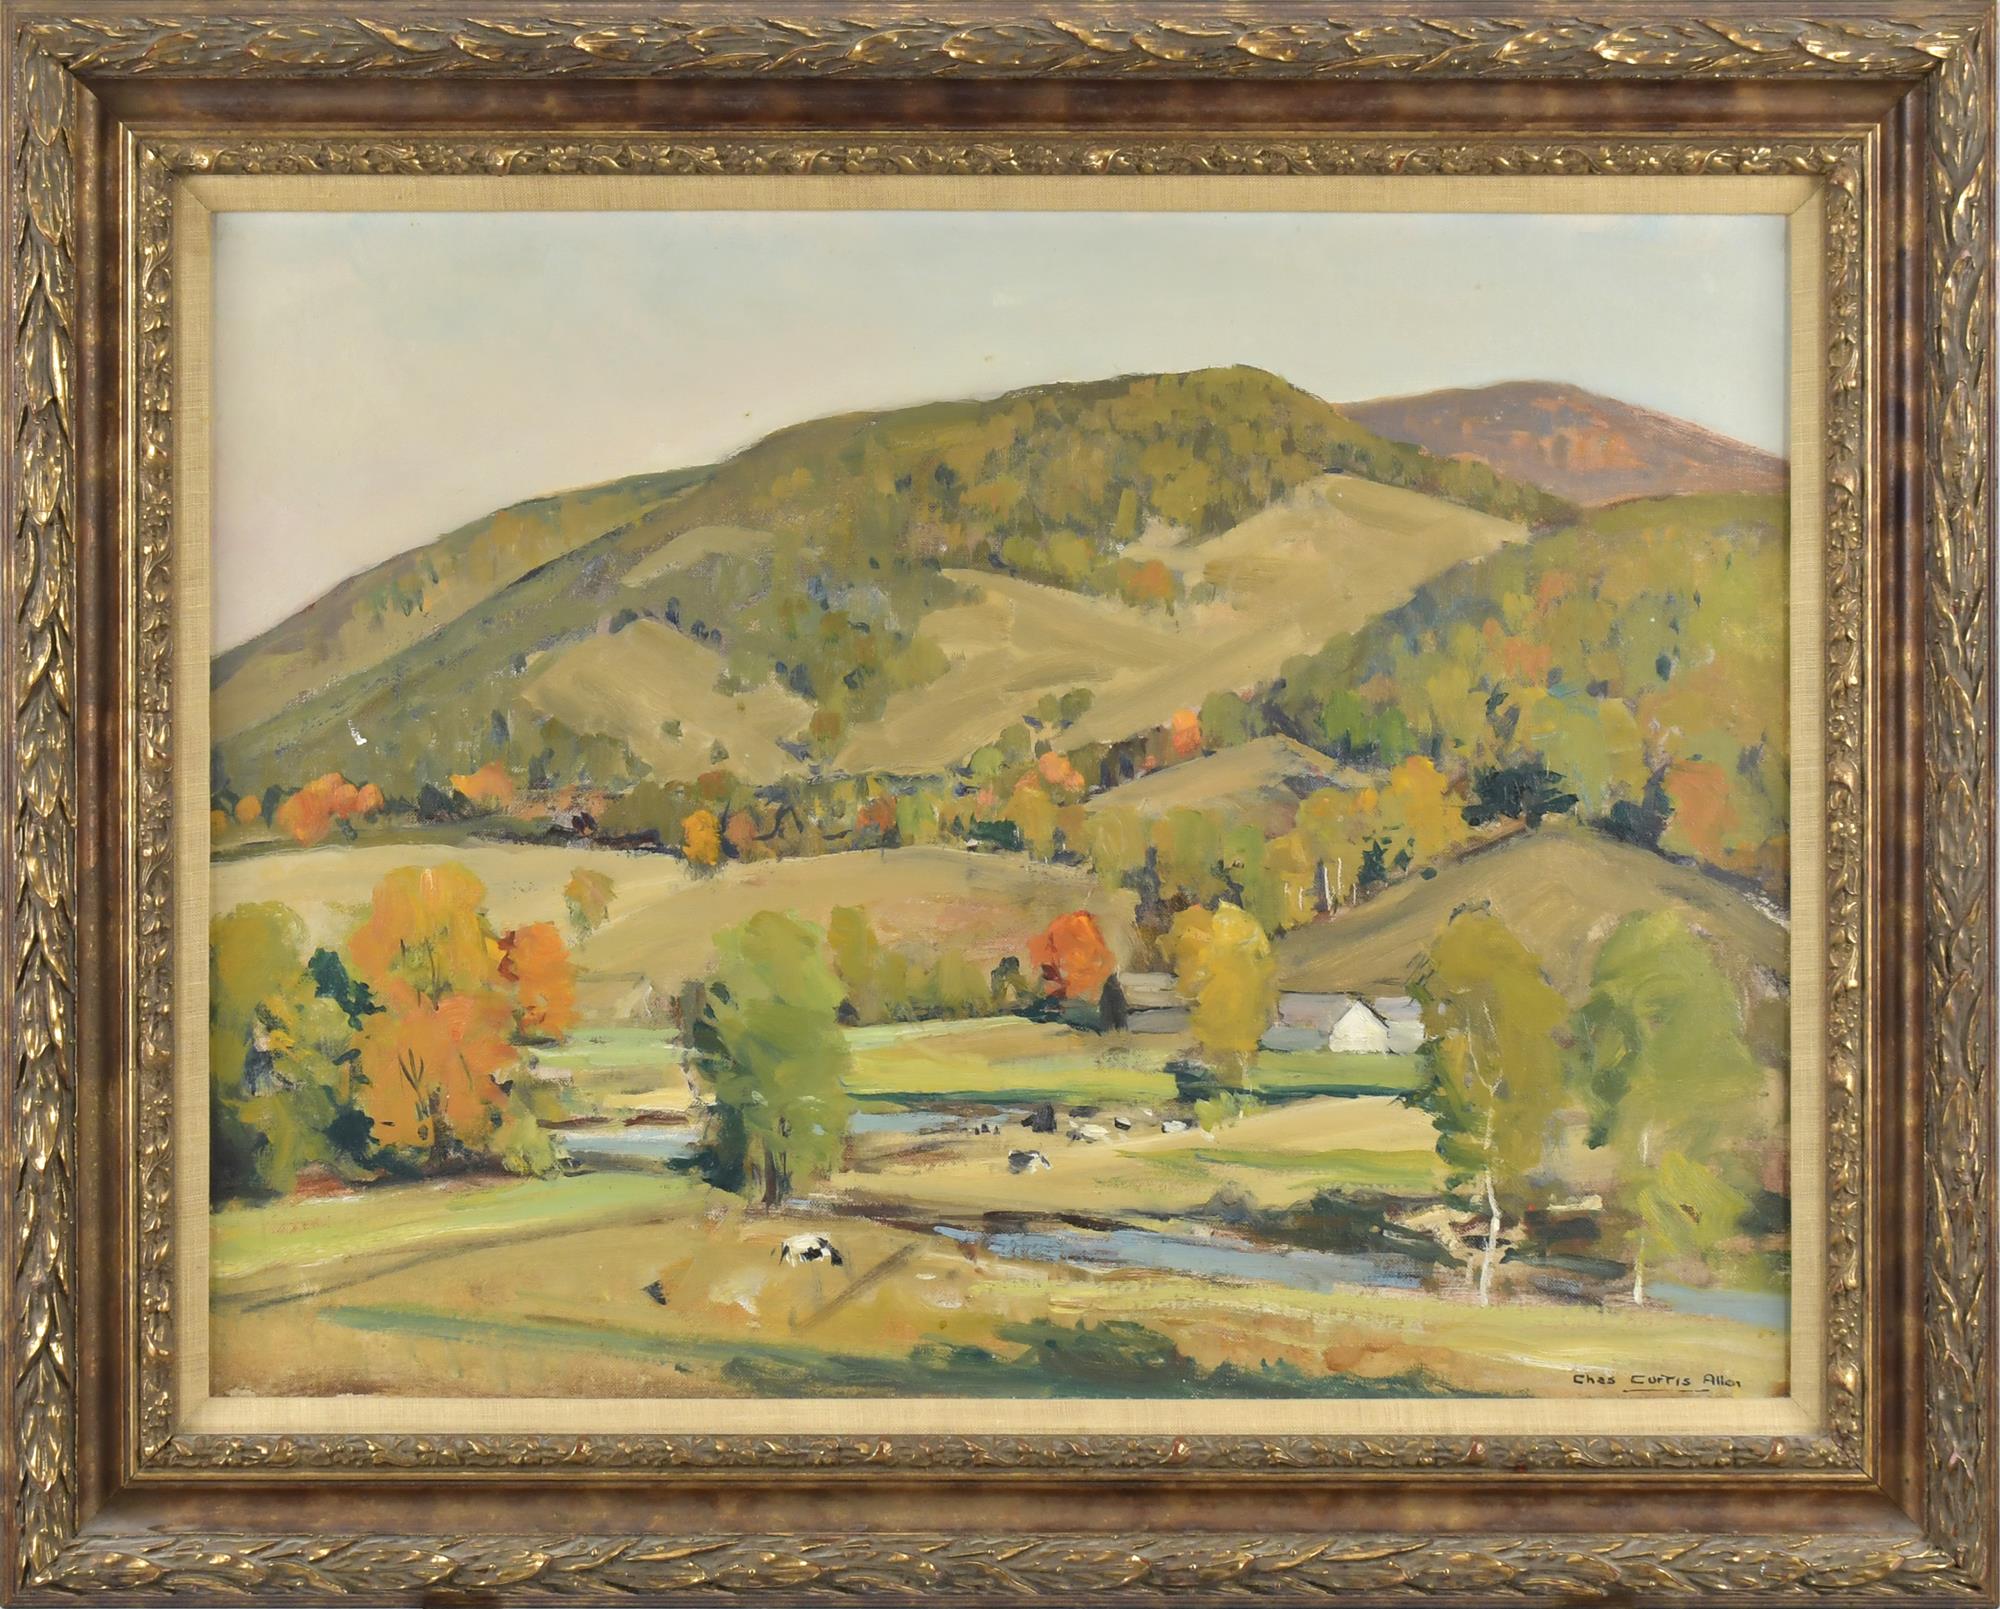 CHARLES CURTIS ALLEN OIL, NEW ENGLAND